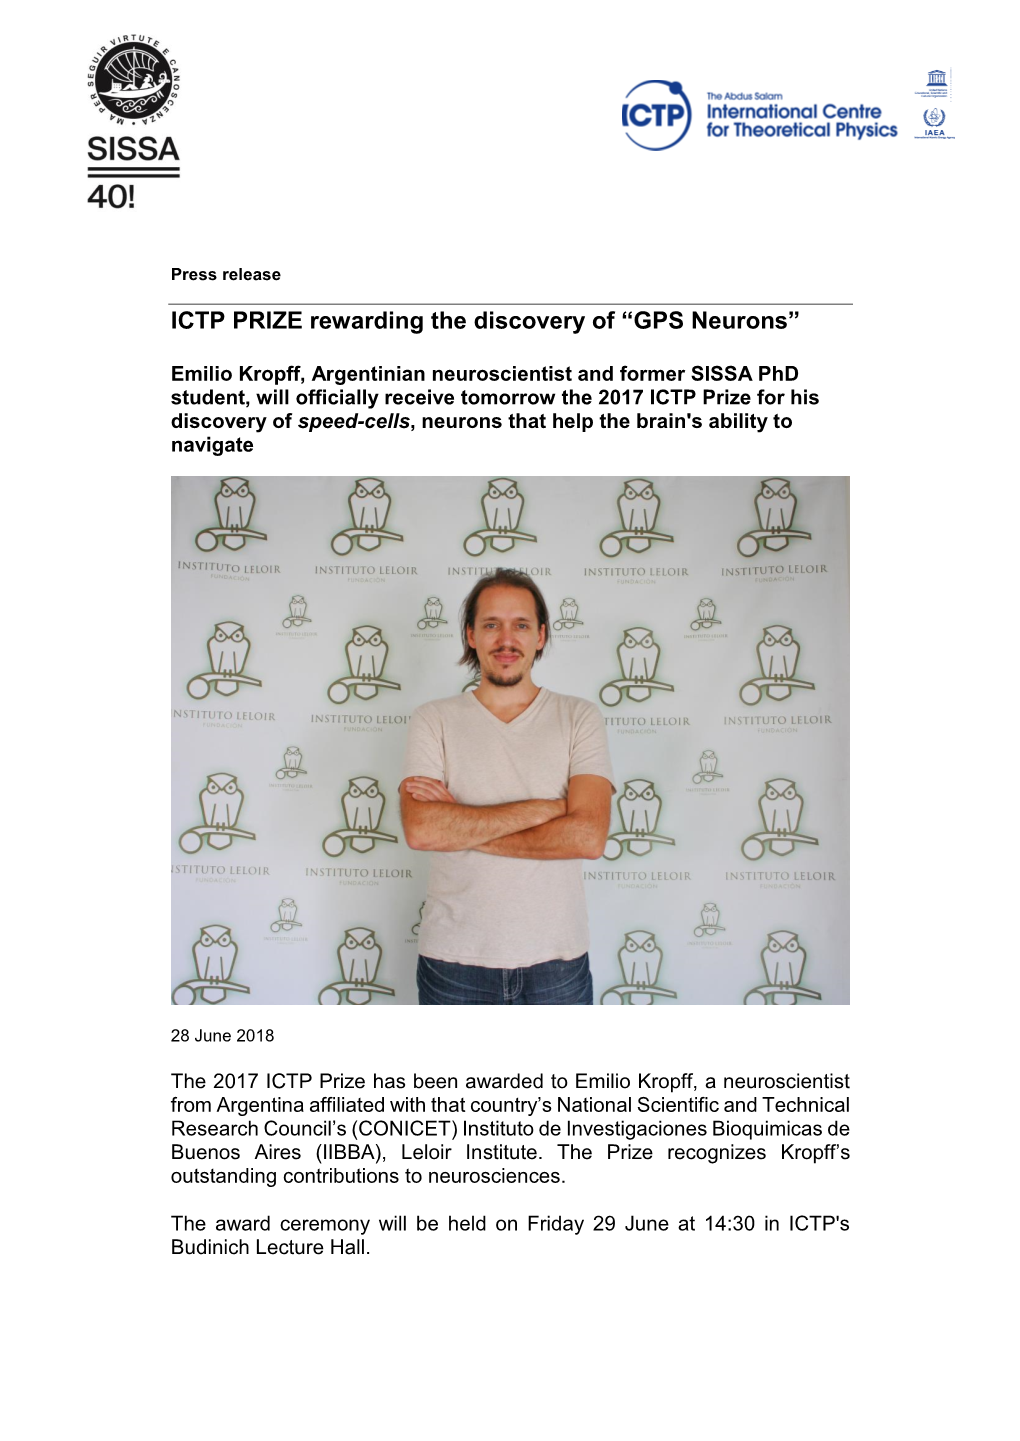 ICTP PRIZE Rewarding the Discovery of “GPS Neurons”